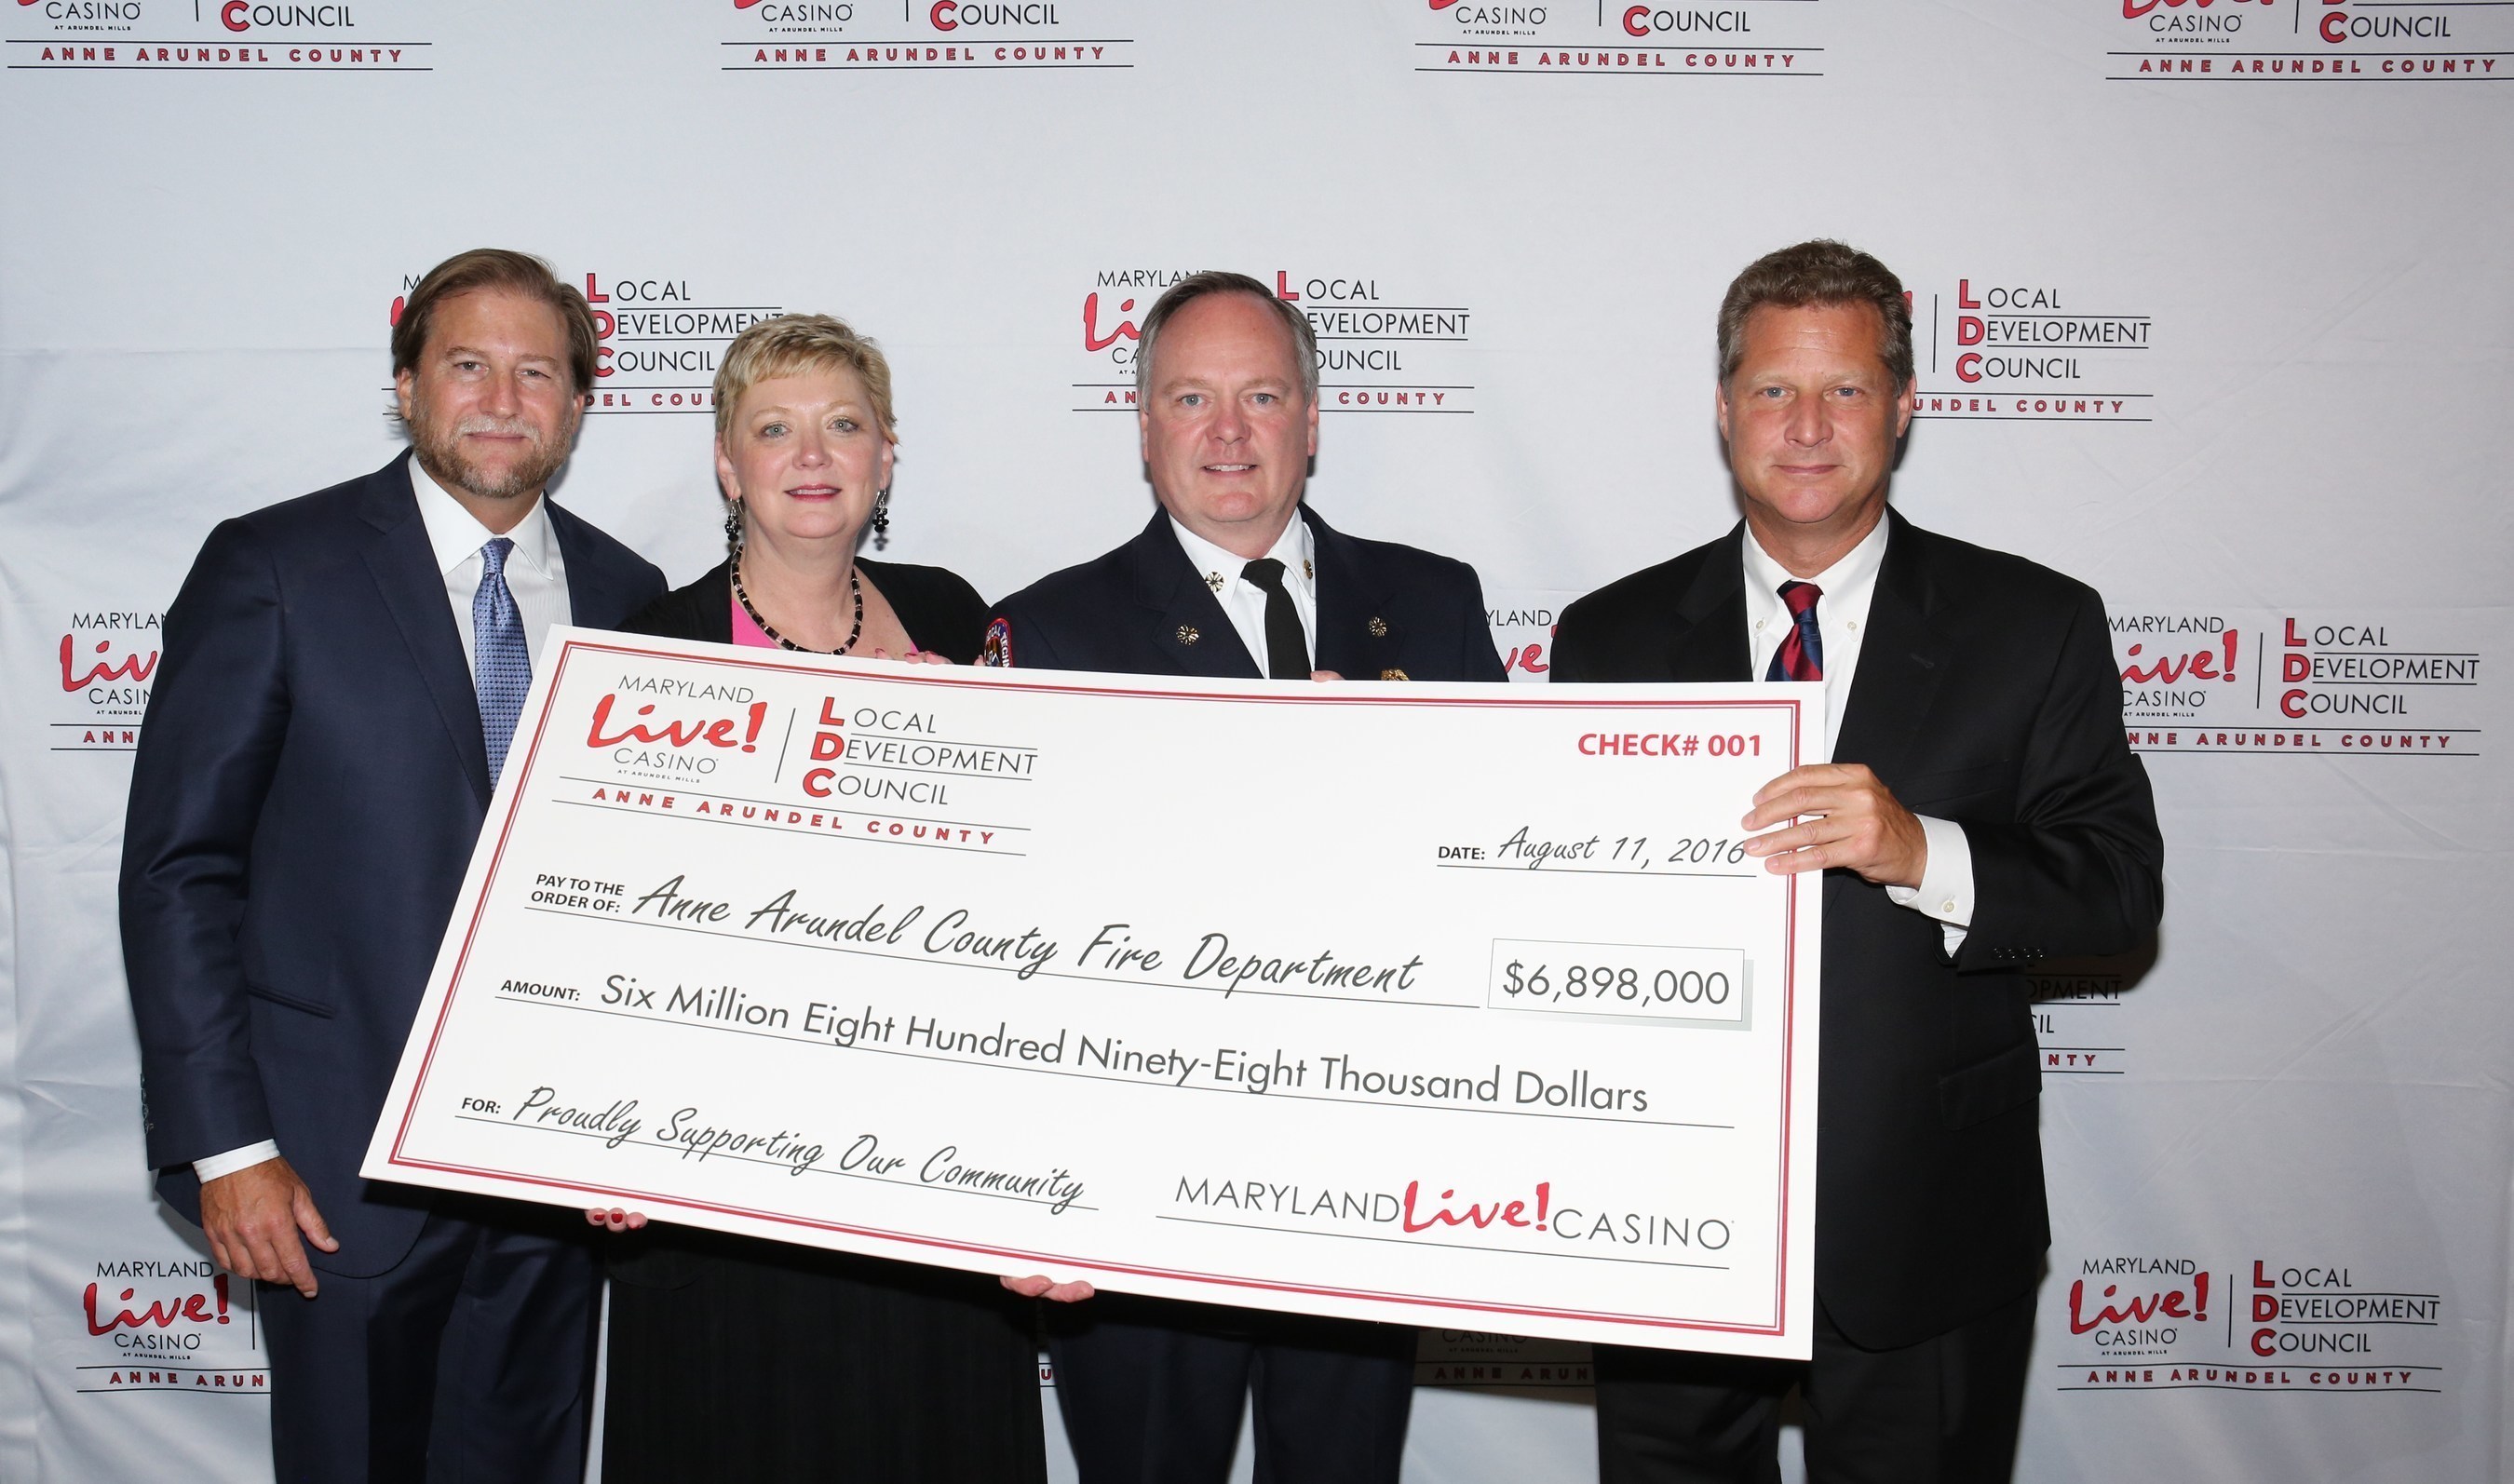 Maryland Live! Casino and Anne Arundel County today awarded more than $18.6 million in local impact grants for fiscal year 2017 to various grant recipients as recommended by the Local Development Council (LDC), which helps to manage the allocation of county gaming tax revenue to local organizations. Joe Weinberg, Managing Partner of The Cordish Companies (far left); Anne Arundel County Executive Steve Schuh (far right); and Claire Louder, Chair of the LDC, (2nd from left) officially presented the grants, including one for $6.8 million to Anne Arundel County Fire Chief Allan Graves.